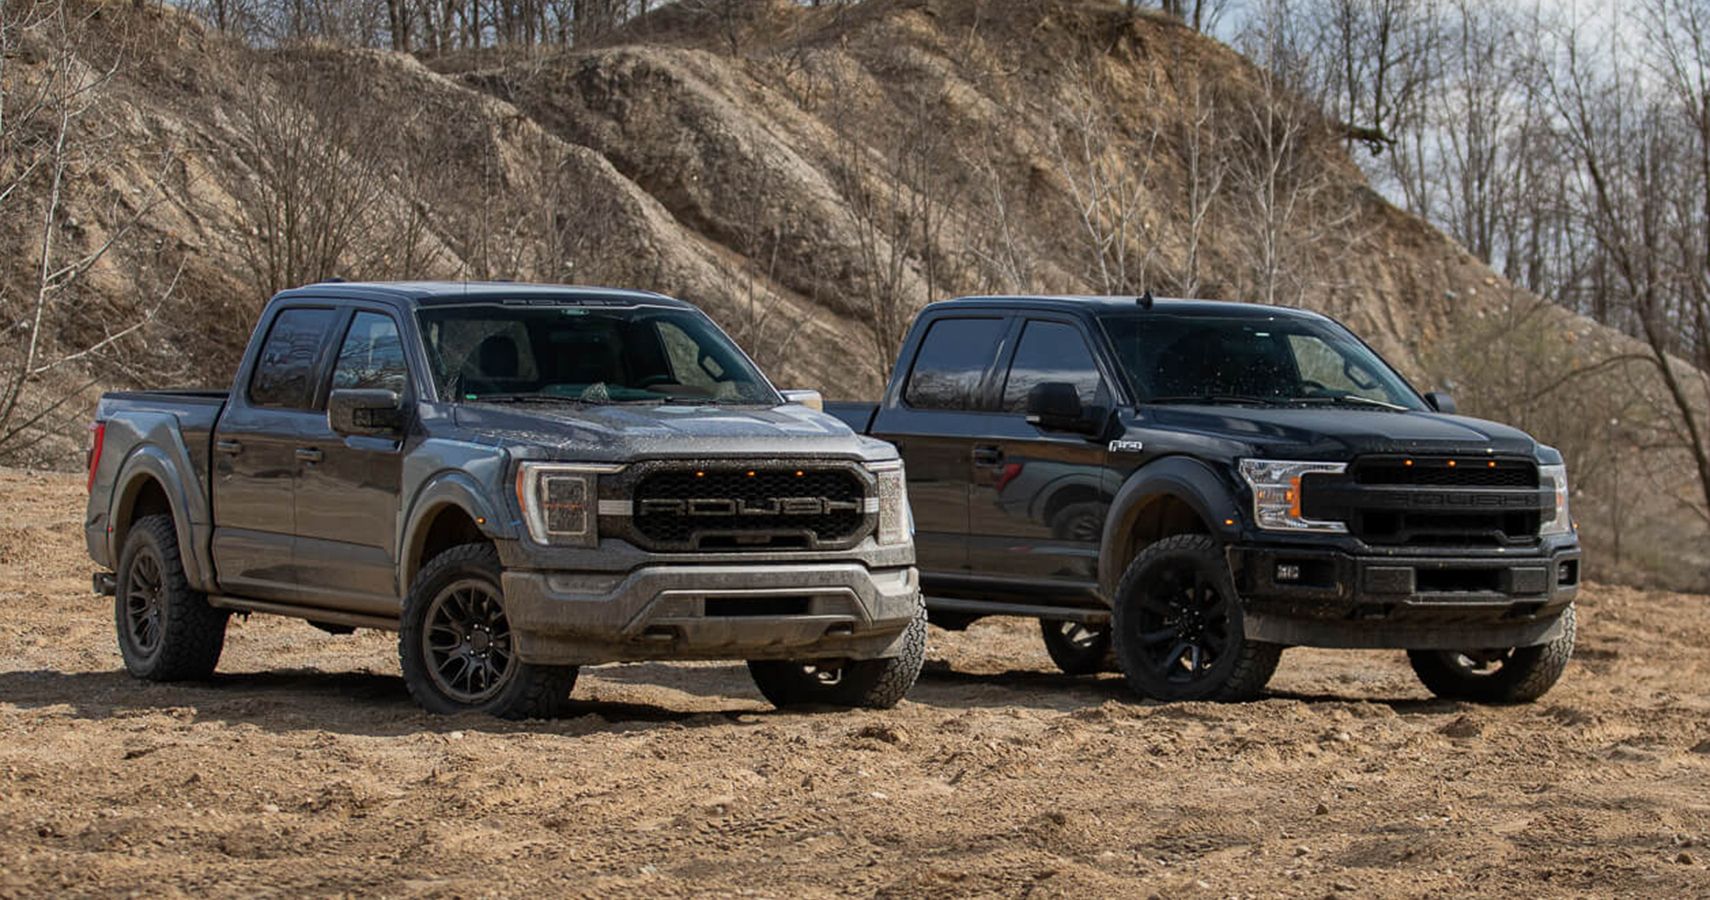 2020 and 2021 Roush F-150